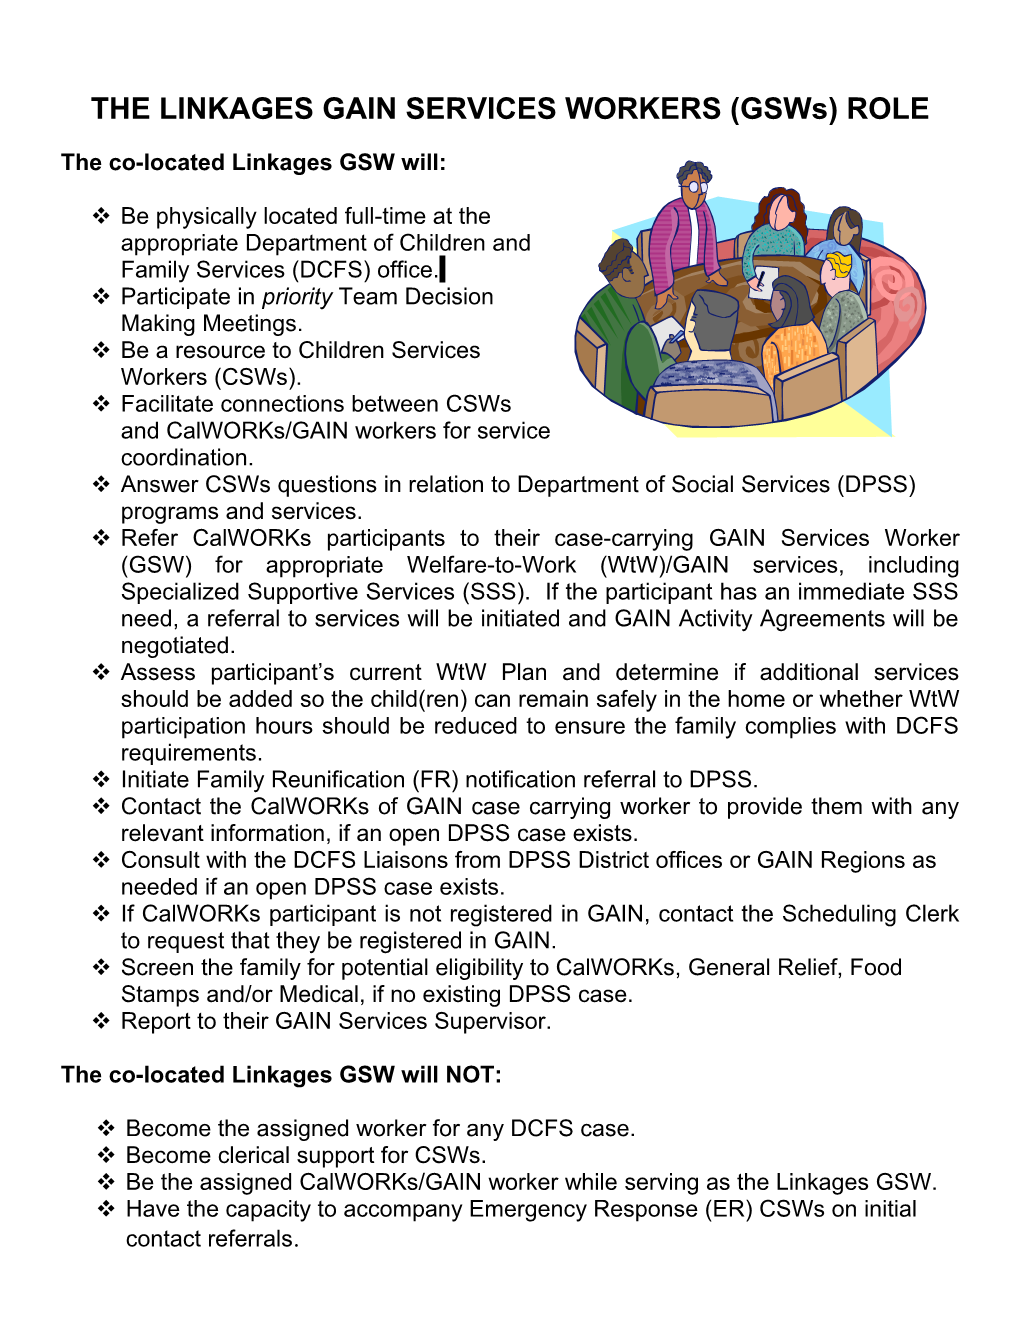 THE LINKAGES GAIN SERVICES WORKERS (Gsws) ROLE